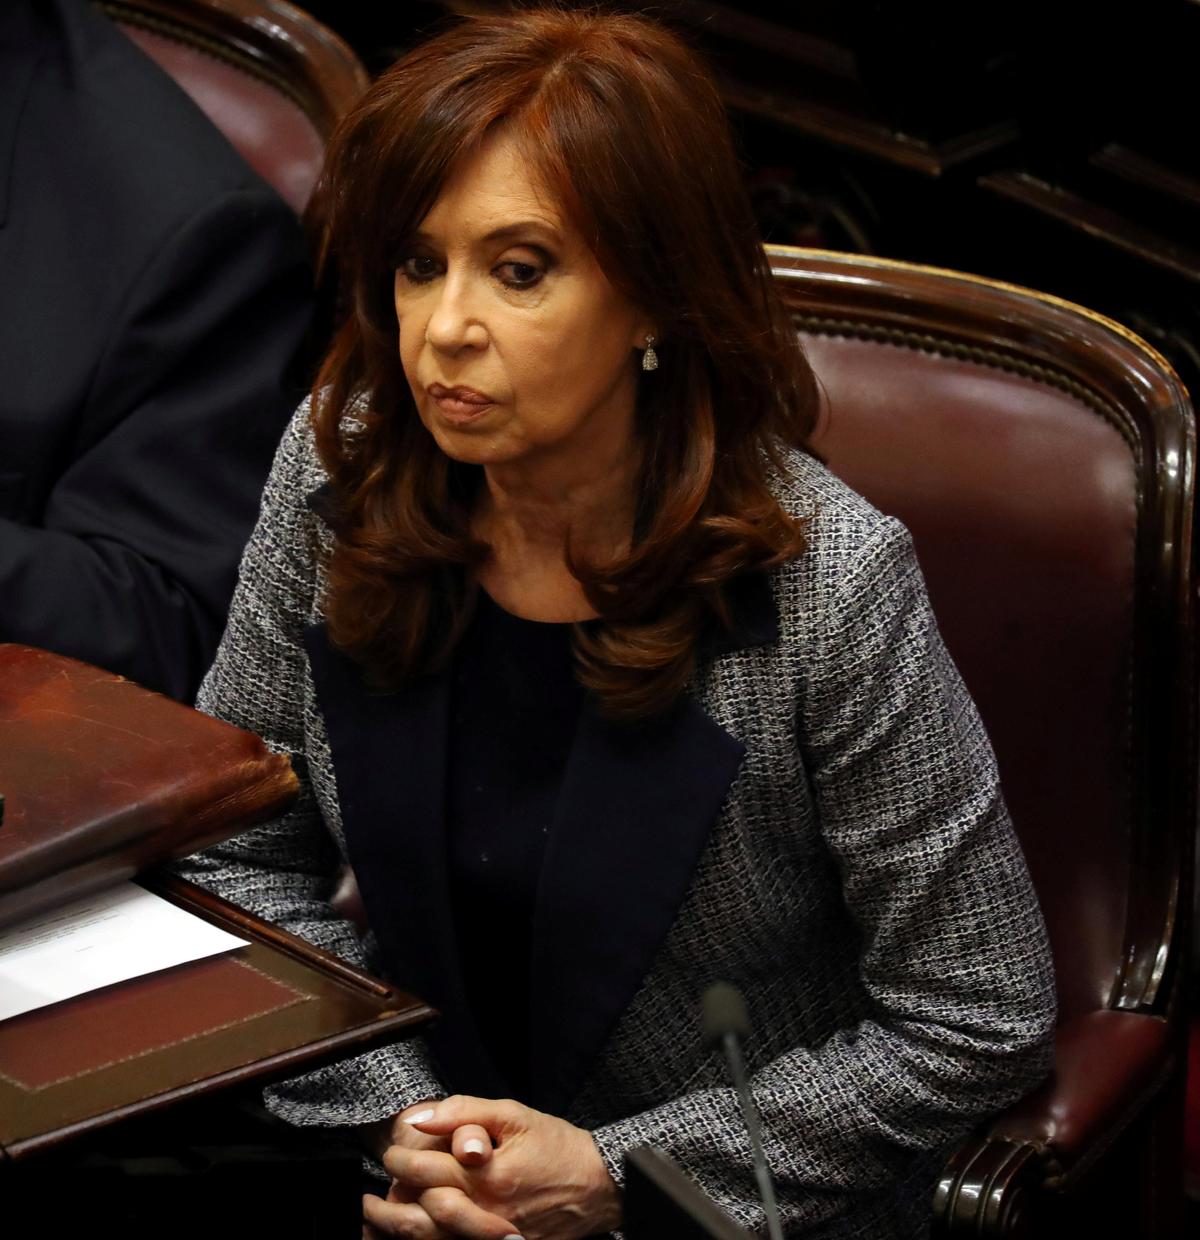 Former Argentine President and senator Cristina Fernandez de Kirchner attends a session at the Senate in Buenos Aires, Argentina August 22, 2018. (By Marcos Brindicci/Reuters)